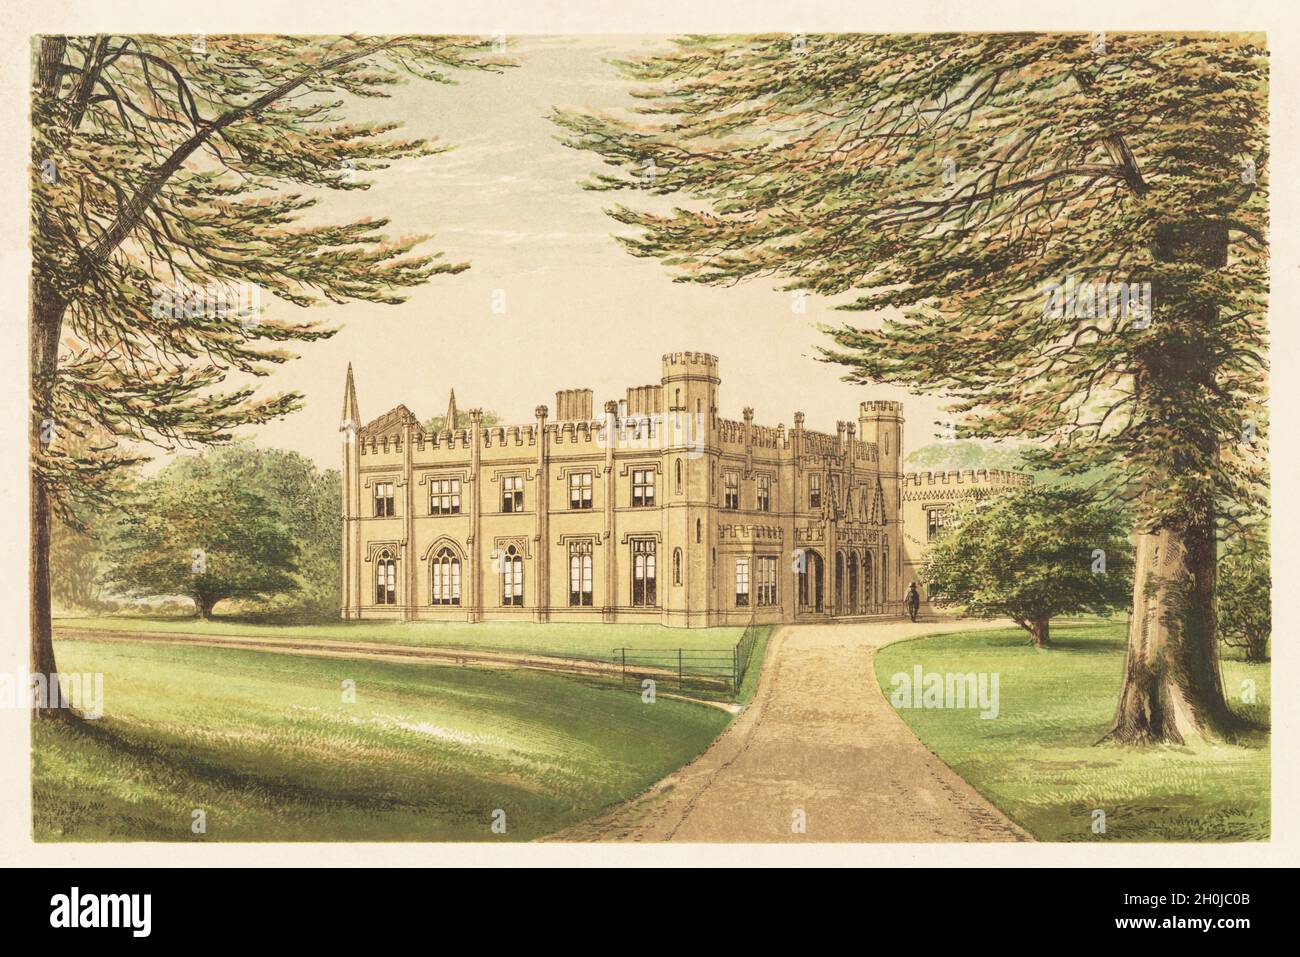 Thrybergh Park, Yorkshire, England. Tudor and Gothic Revival style house built in sandstone by John Webb in 1820 for Colonel Fullerton. Colour woodblock by Benjamin Fawcett in the Baxter process of an illustration by Alexander Francis Lydon from Reverend Francis Orpen Morris’s Picturesque Views of the Seats of Noblemen and Gentlemen of Great Britain and Ireland, William Mackenzie, London, 1880. Stock Photo